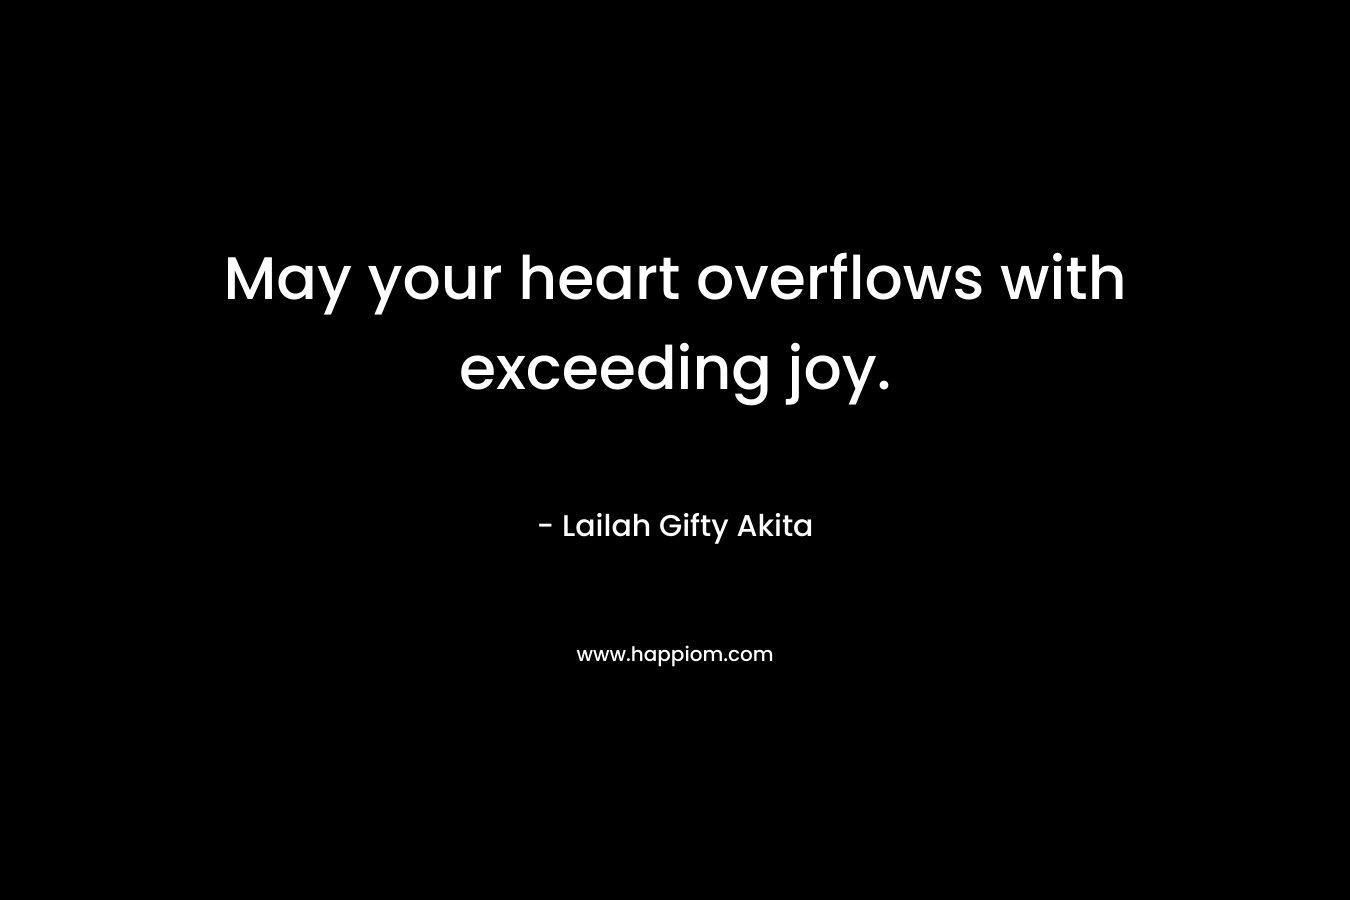 May your heart overflows with exceeding joy.